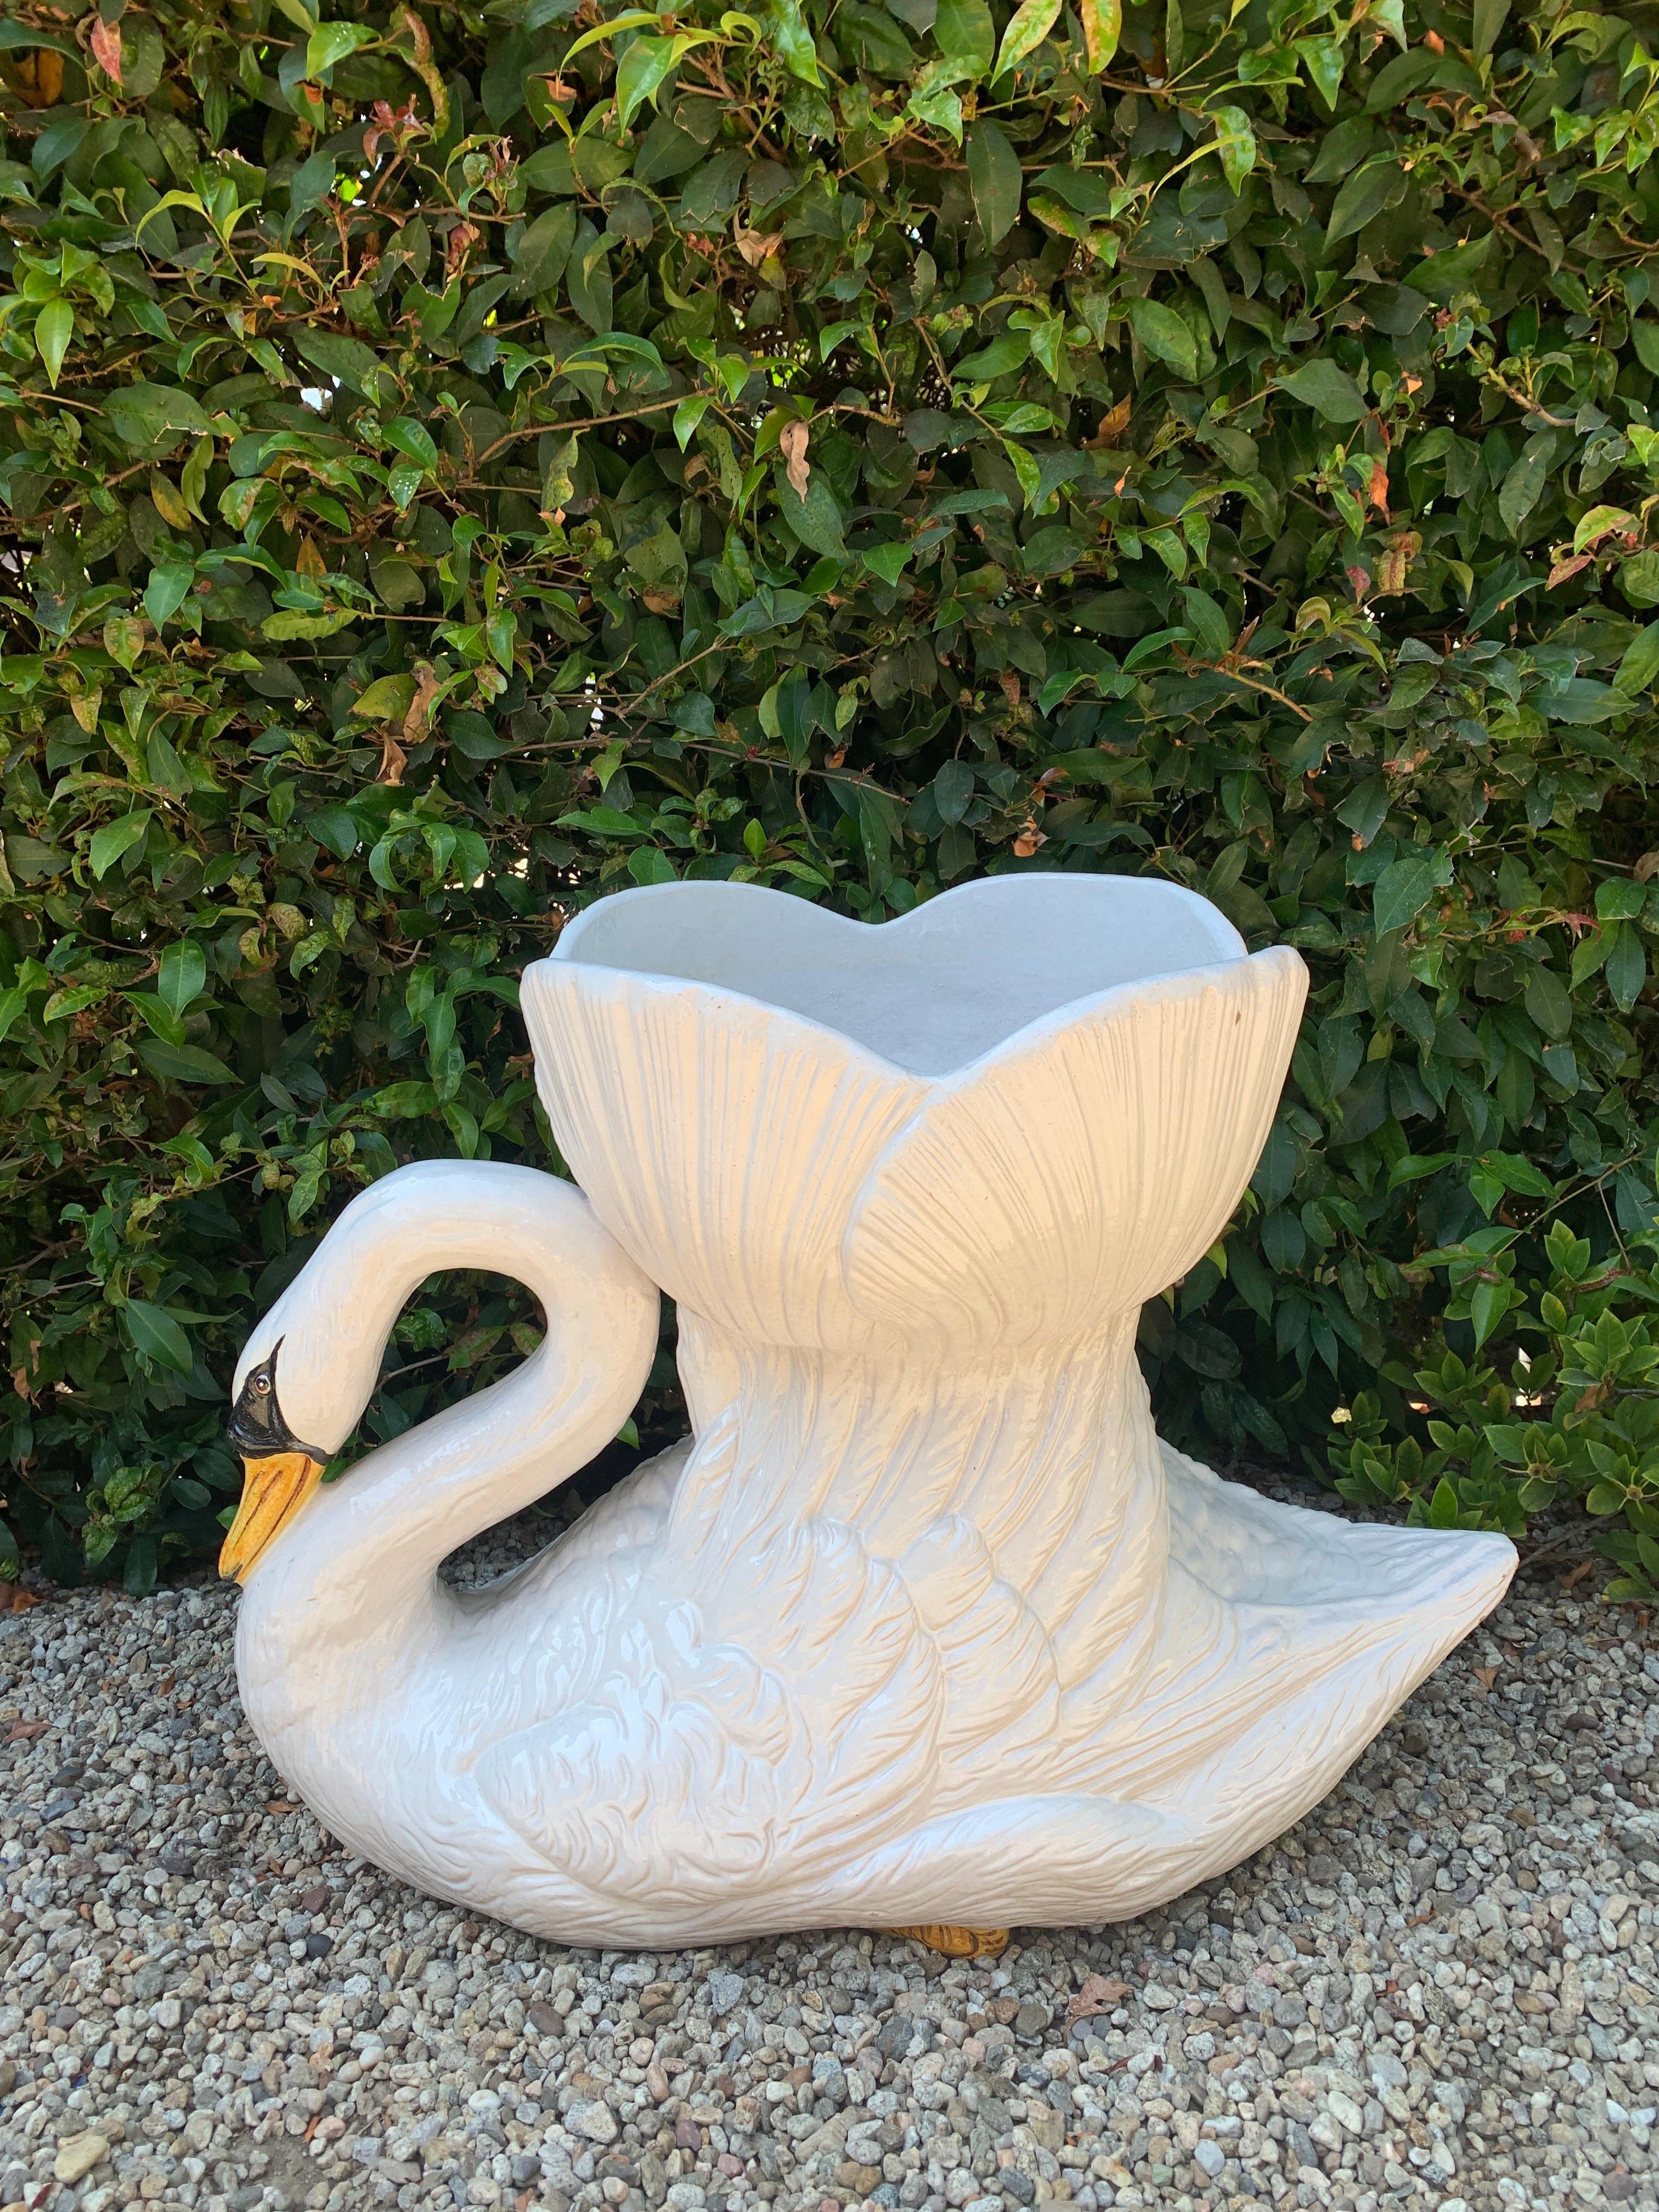 A monumental terra cotta swan from Italy. The piece is a wonderful addition to the garden or lanai. Made of dense material and able to withstand the elements. Works well as a centerpiece as well. The 15